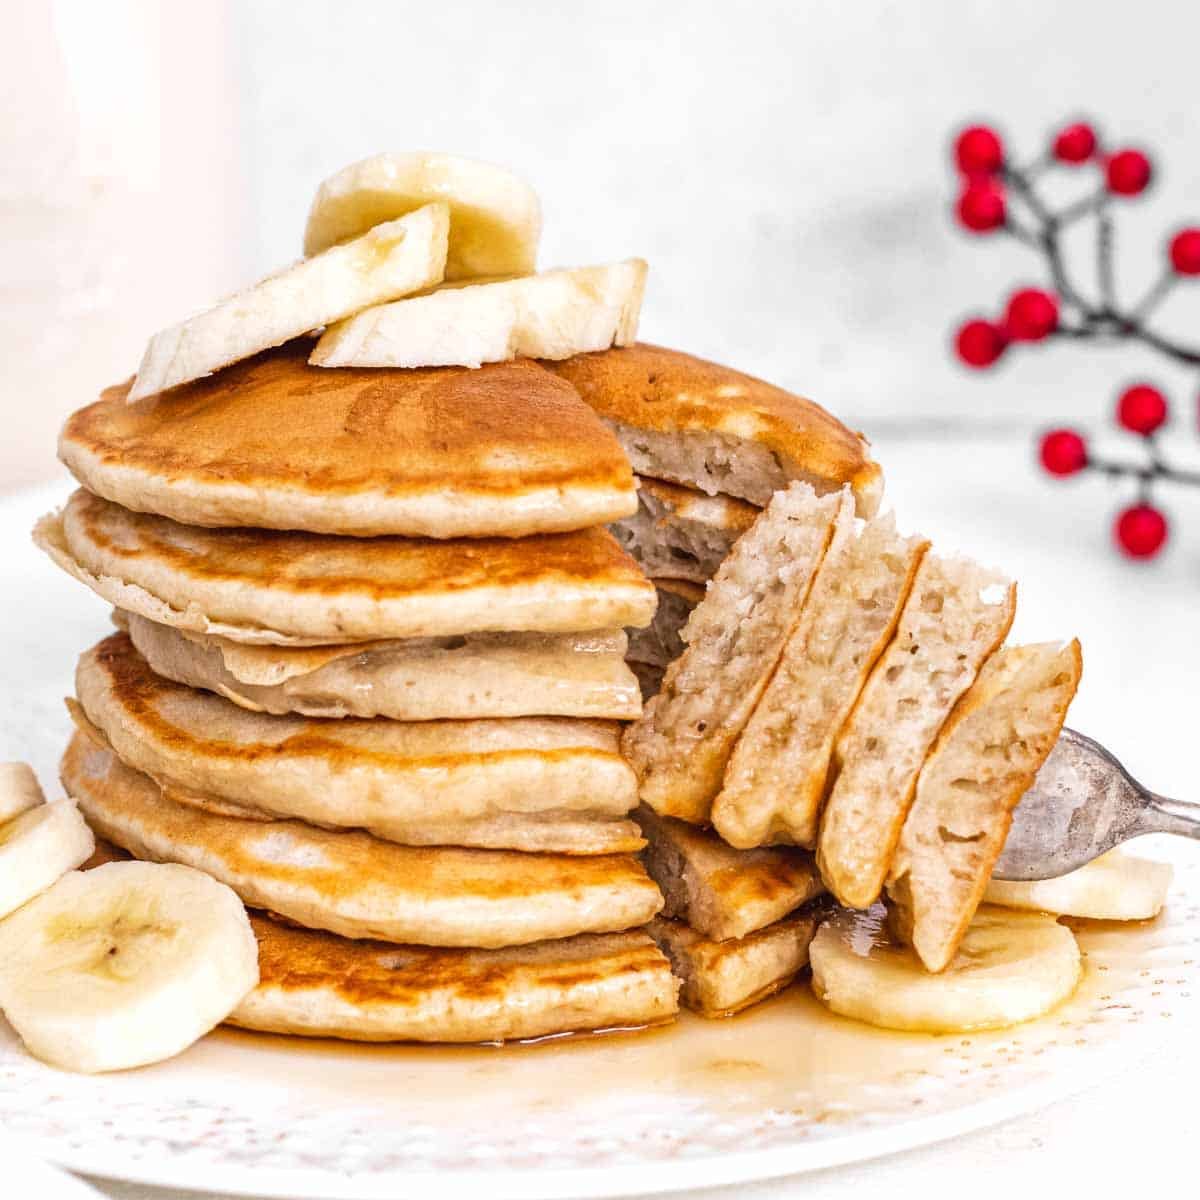 Banana pancake stack with cut out portion